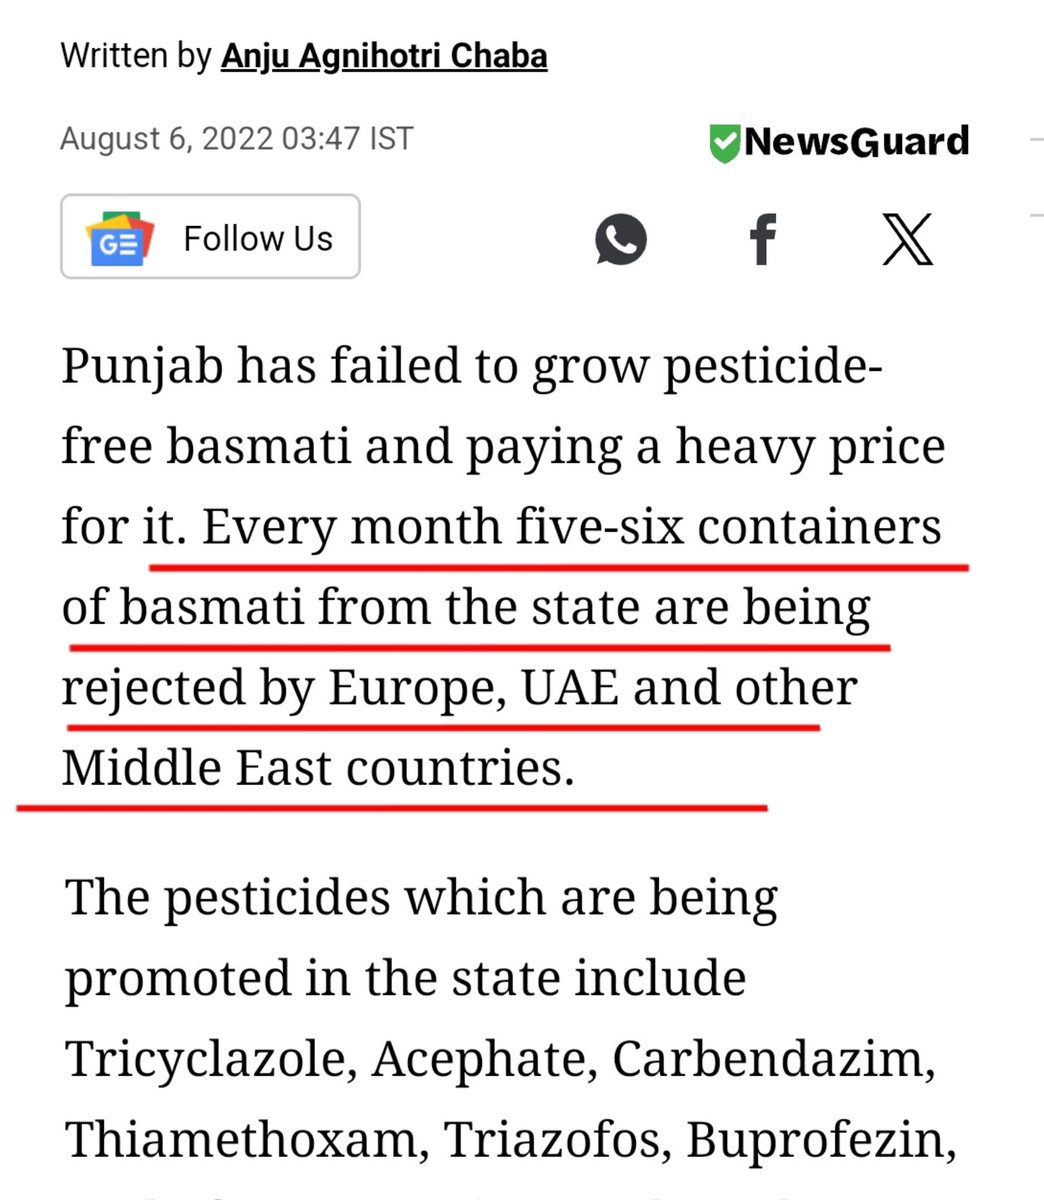 I'm very sure that this rejected, pesticides-laden basmati rice is freely available in Indian market, and we are consuming it thinking we are eating the best quality rice.